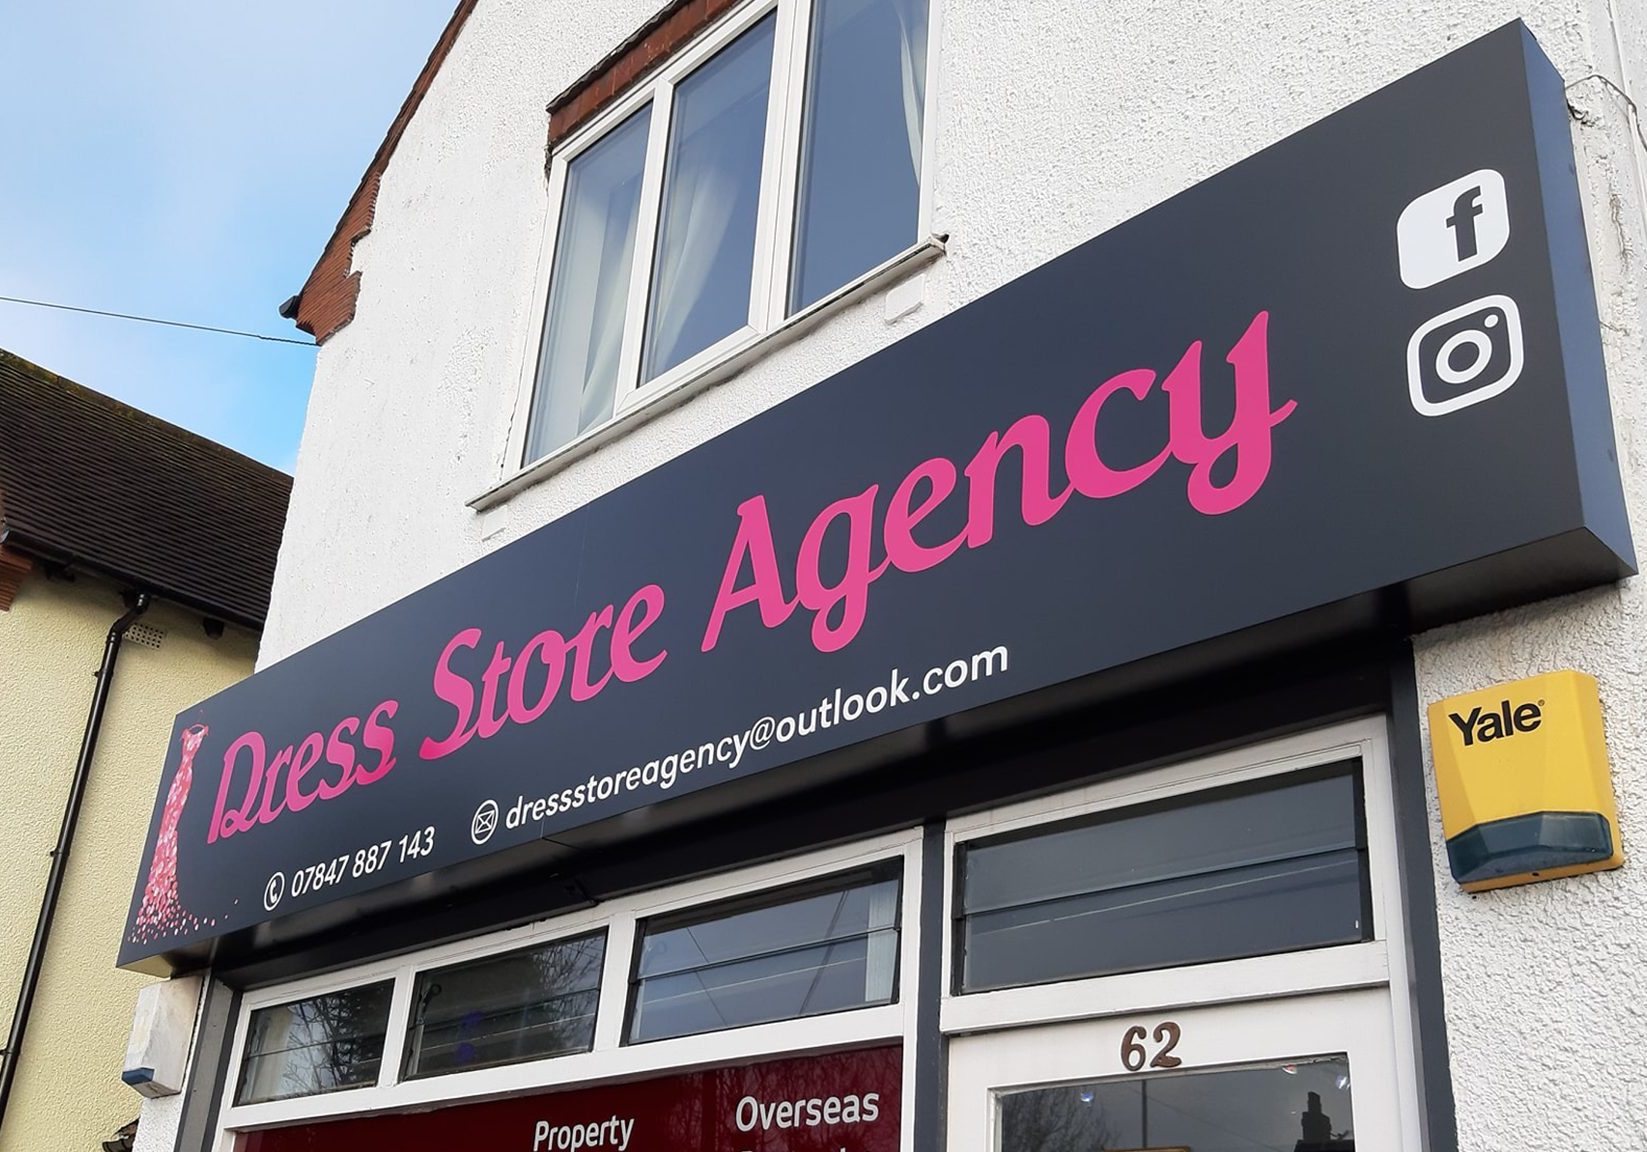 Dress Store Agency shop sign